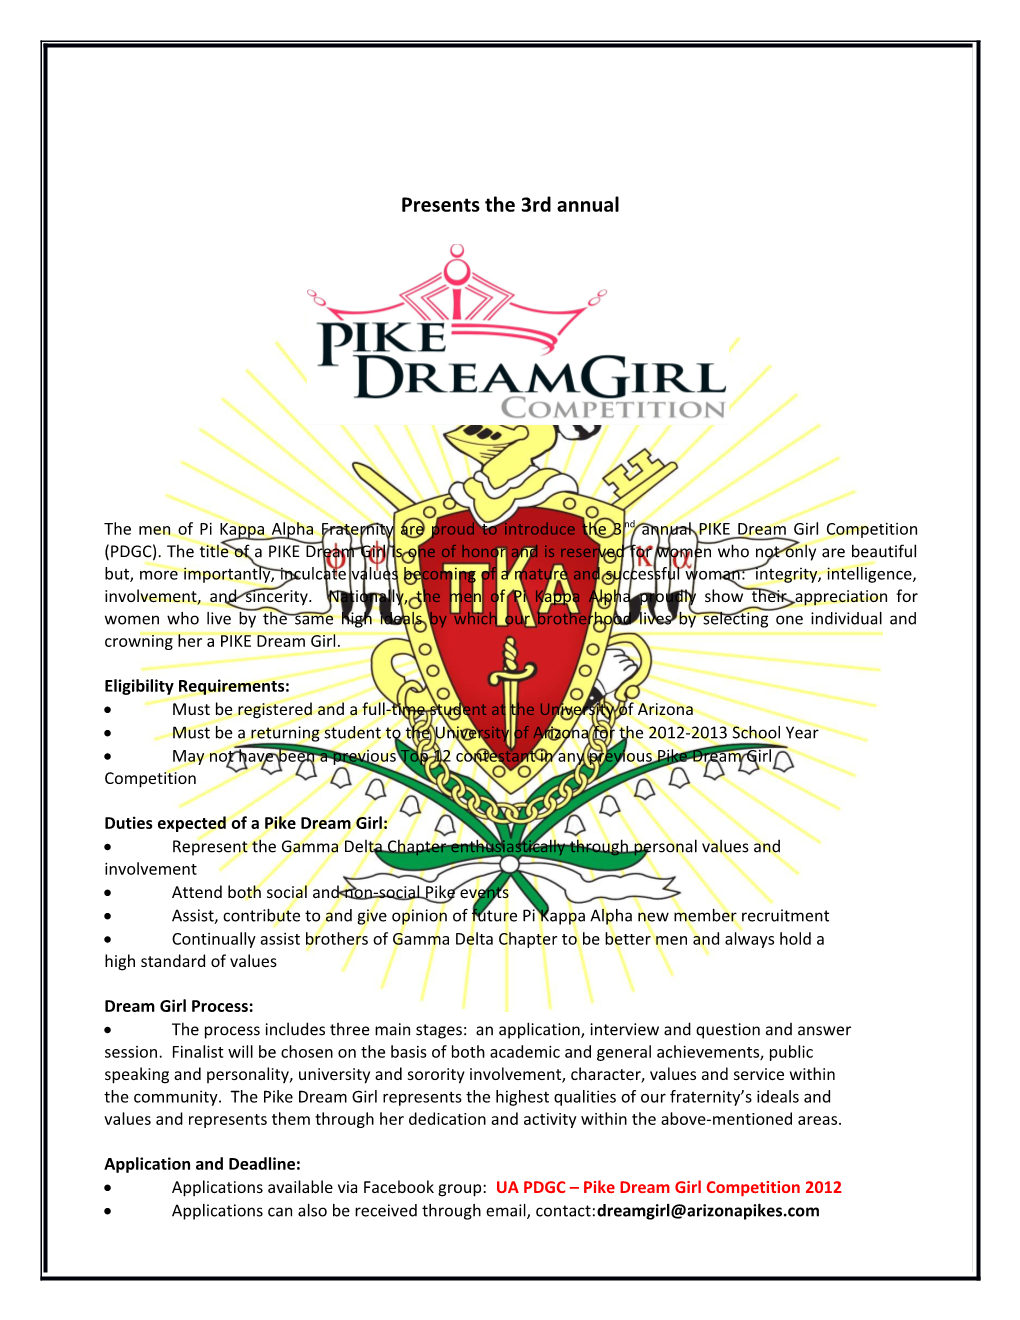 Pi Kappa Alpha Fraternity Presents the First Annualpike Dream Girl Competitionfirefighters